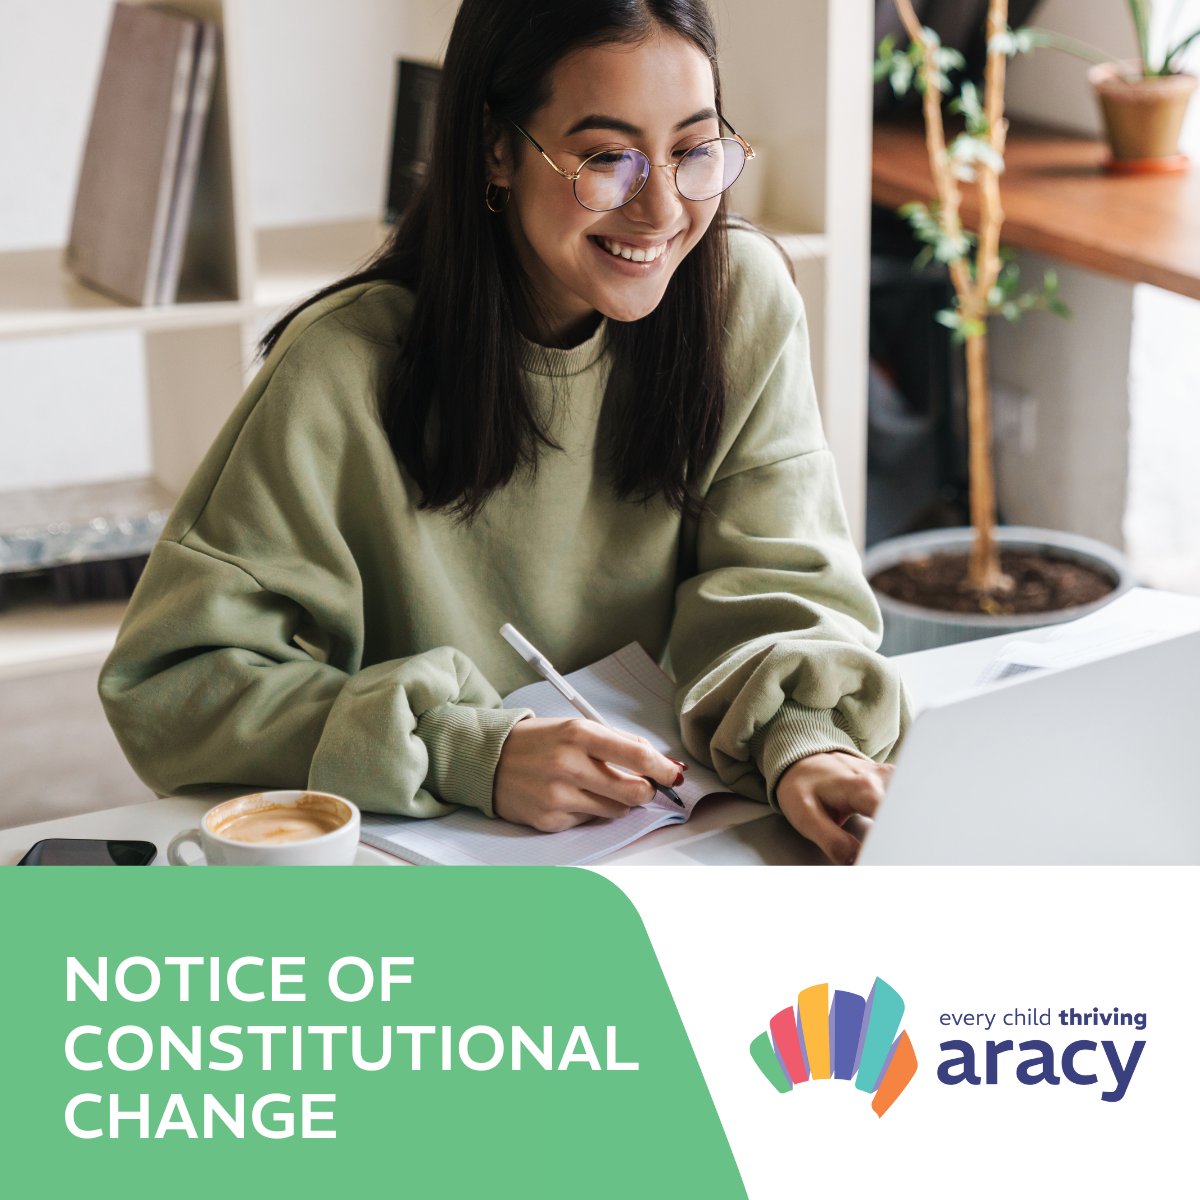 ARACY is updating its Constitution to better reflect our work for the wellbeing of children & young people. Vote on proposed changes at upcoming member meetings. More information can be found on our website. hubs.la/Q02xl2CW0 #ARACY #children #youth #everychildthriving